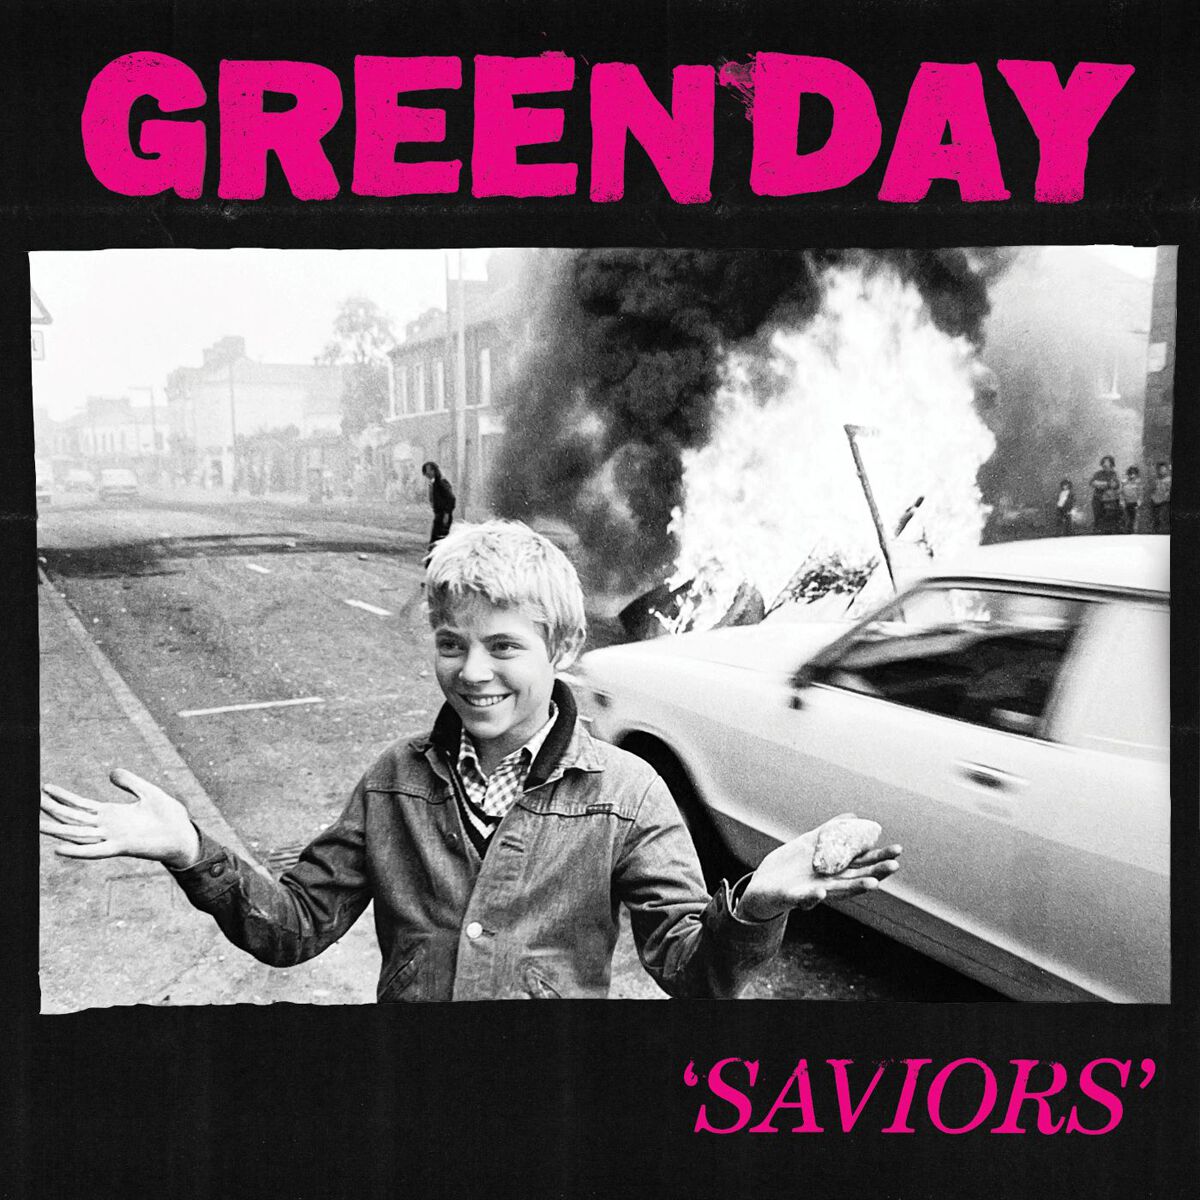 Saviors (deluxe Gatefold With Poster Vinyl), Green Day, Lp_record, New, Free & F